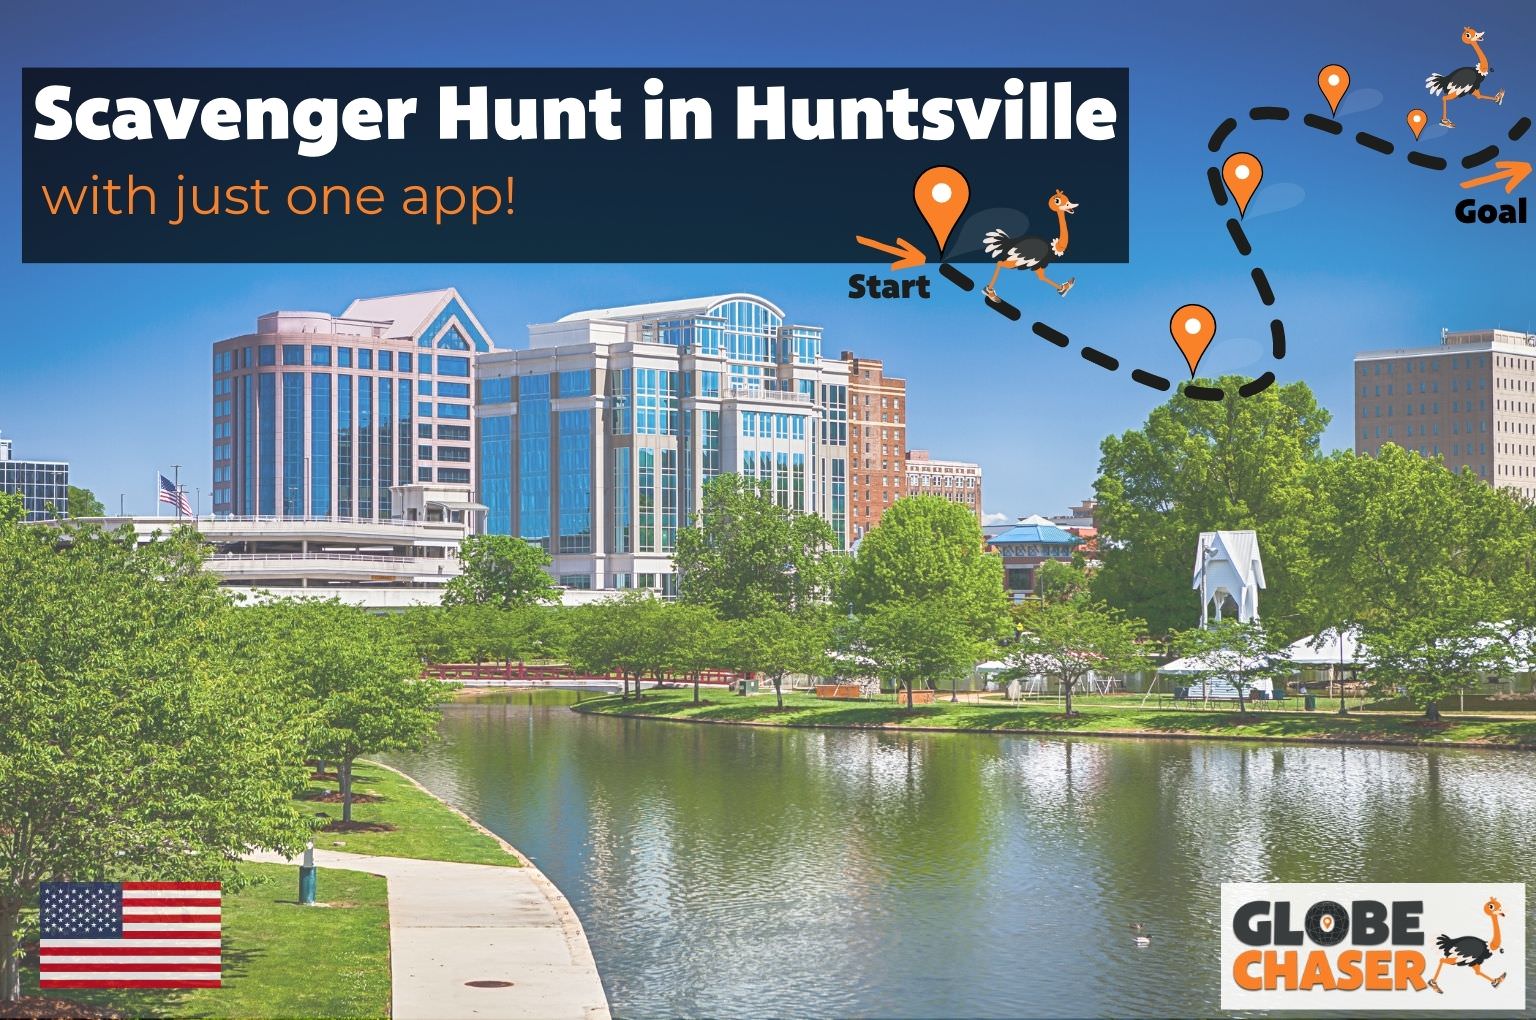 Scavenger Hunt in Huntsville, USA - Family Activities with the Globe Chaser App for Outdoor Fun